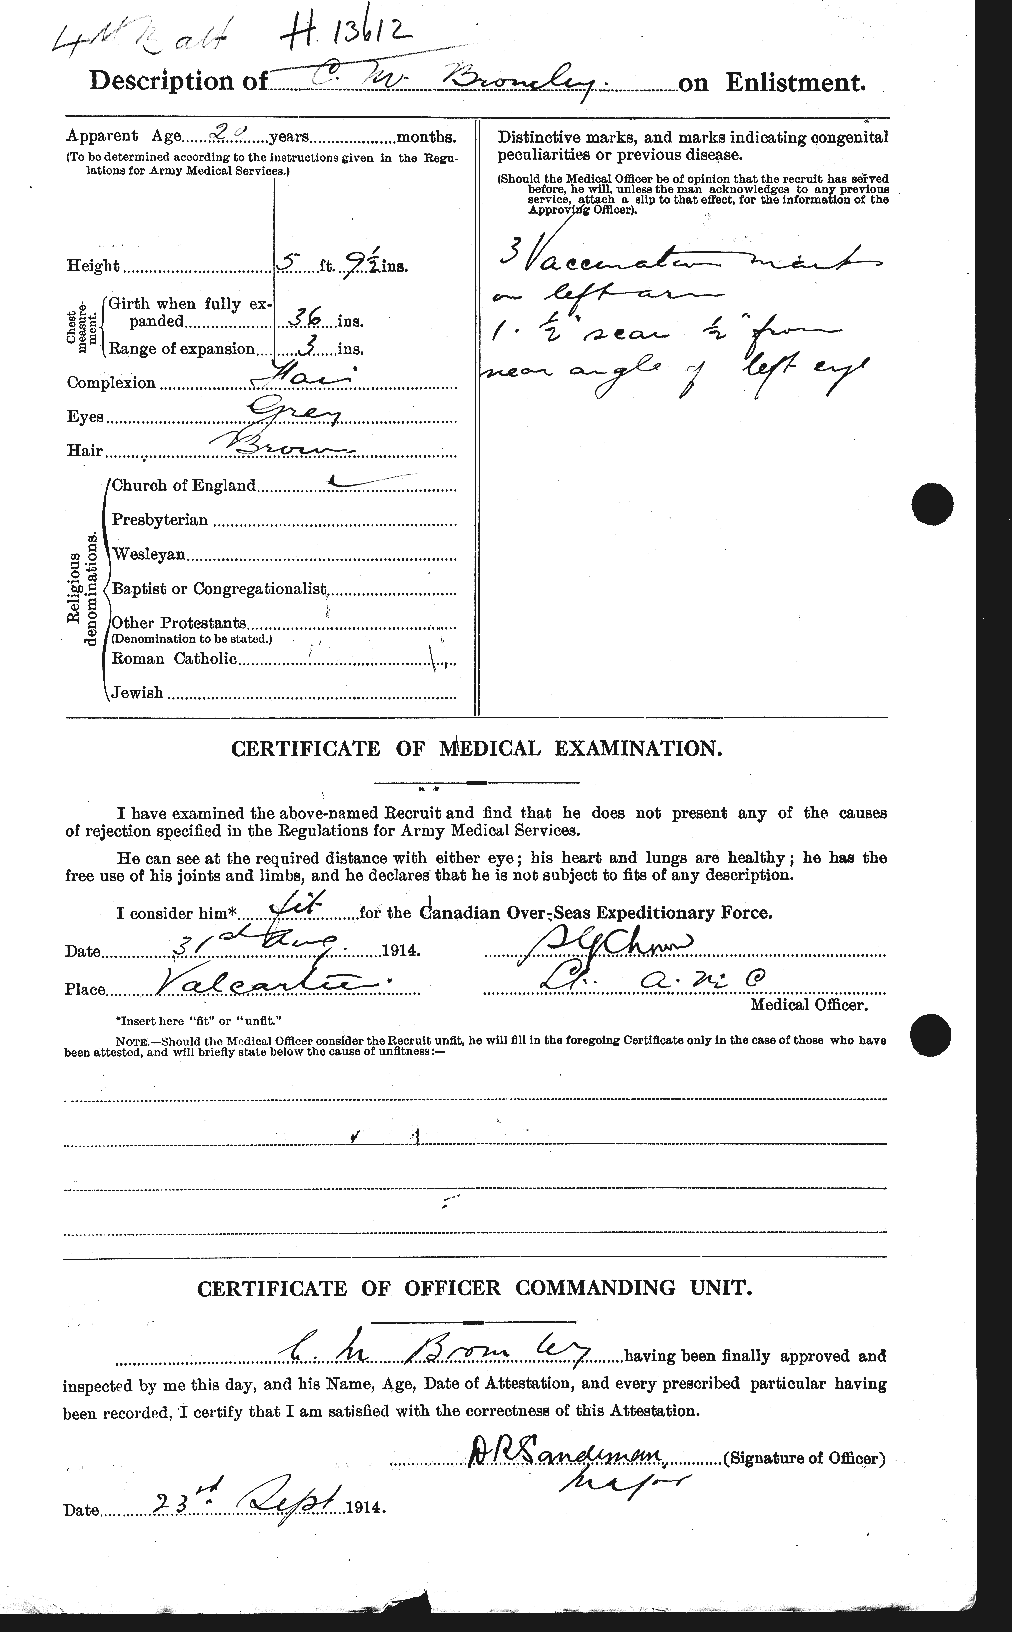 Personnel Records of the First World War - CEF 262156b